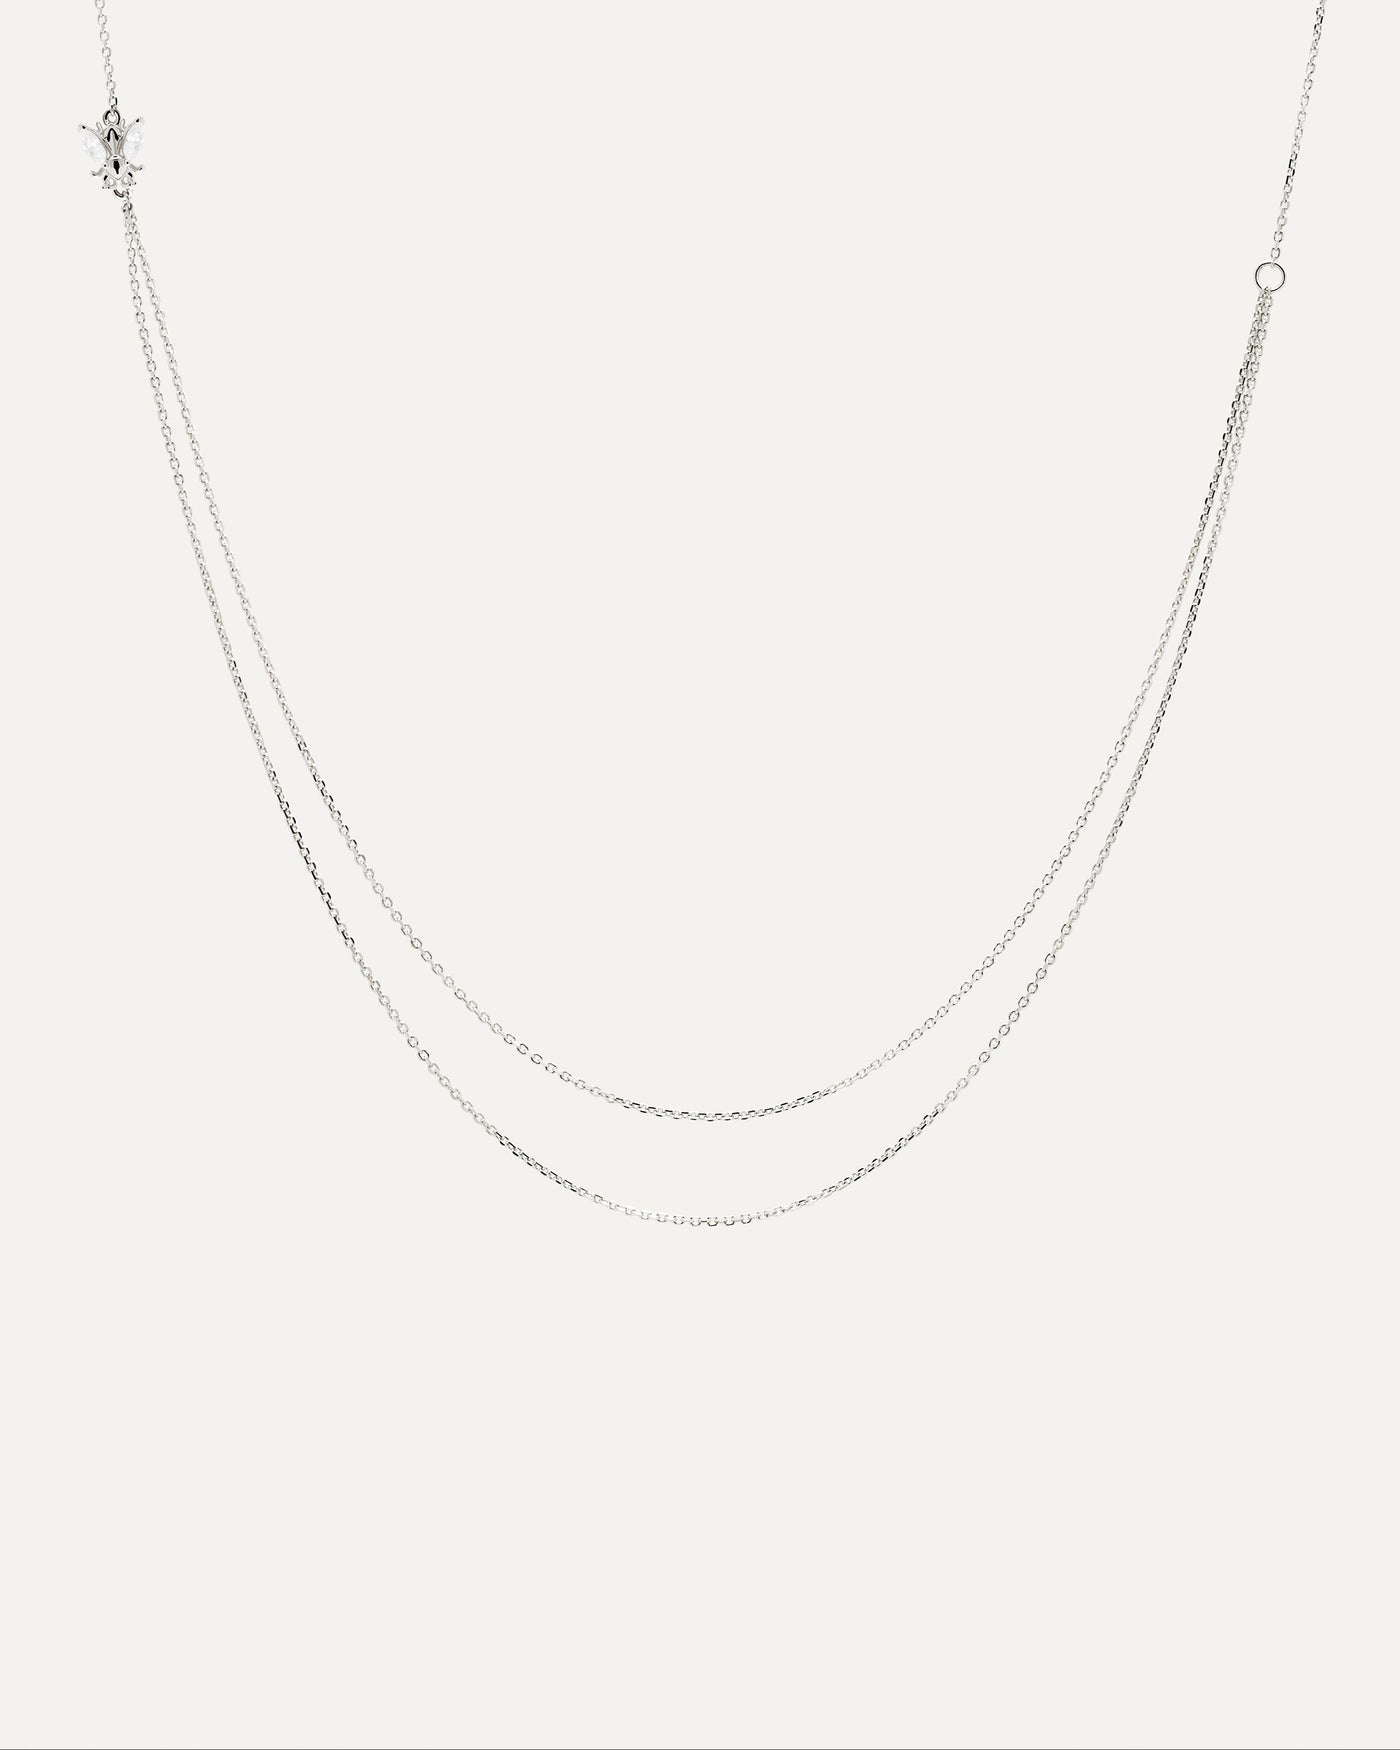 2022 Selection | Breeze Silver Necklace. Get the latest arrival from PDPAOLA. Place your order safely and get this Best Seller. Free Shipping over 40€